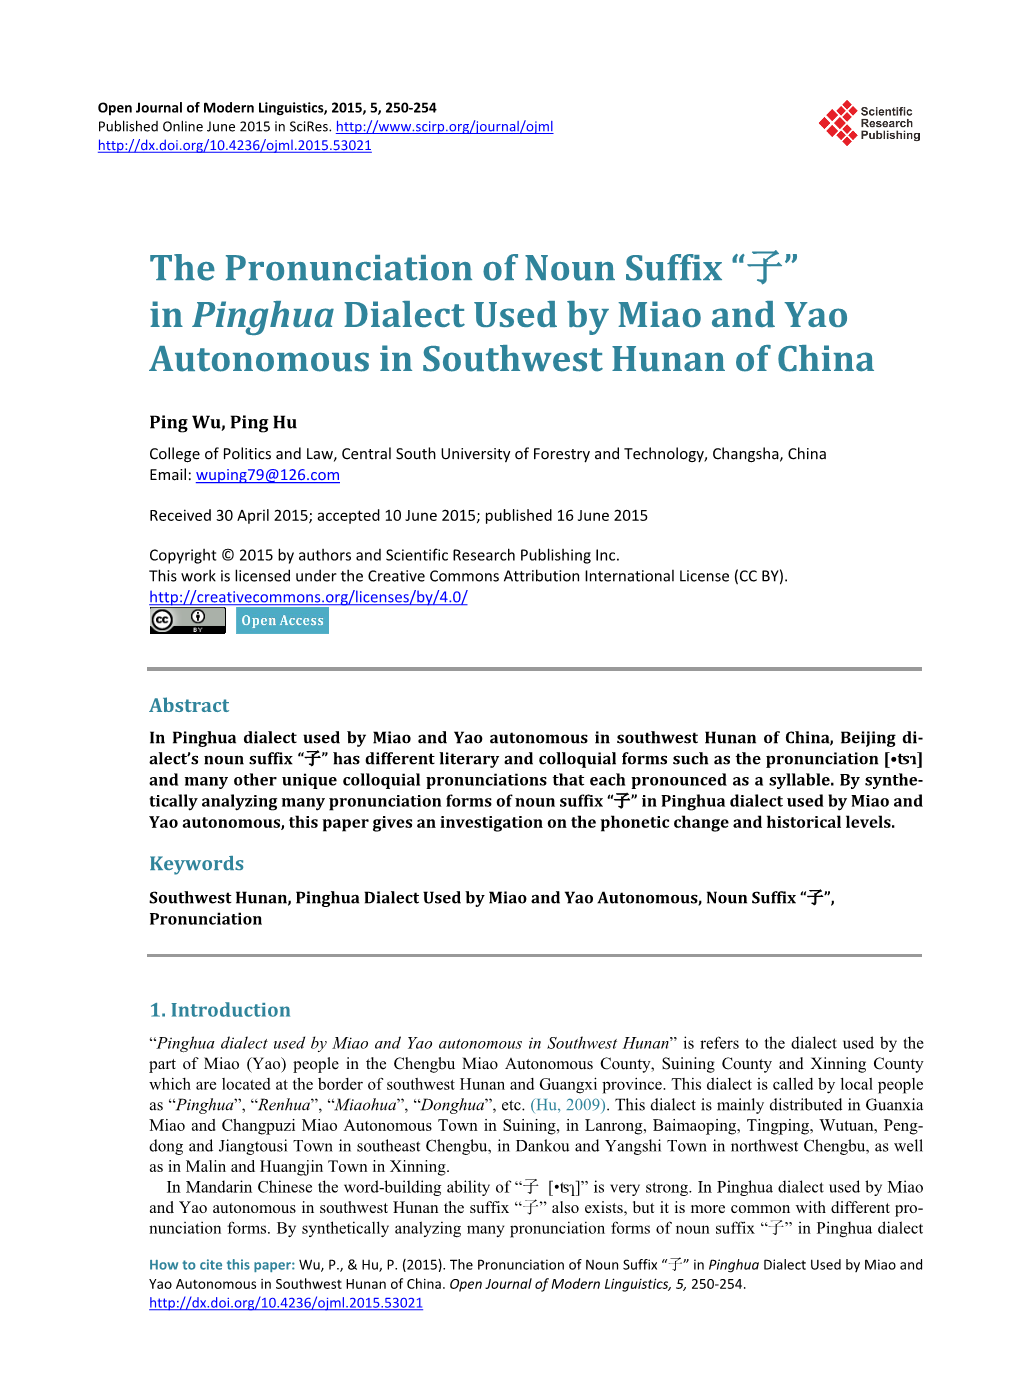 The Pronunciation of Noun Suffix “子” in Pinghua Dialect Used by Miao and Yao Autonomous in Southwest Hunan of China